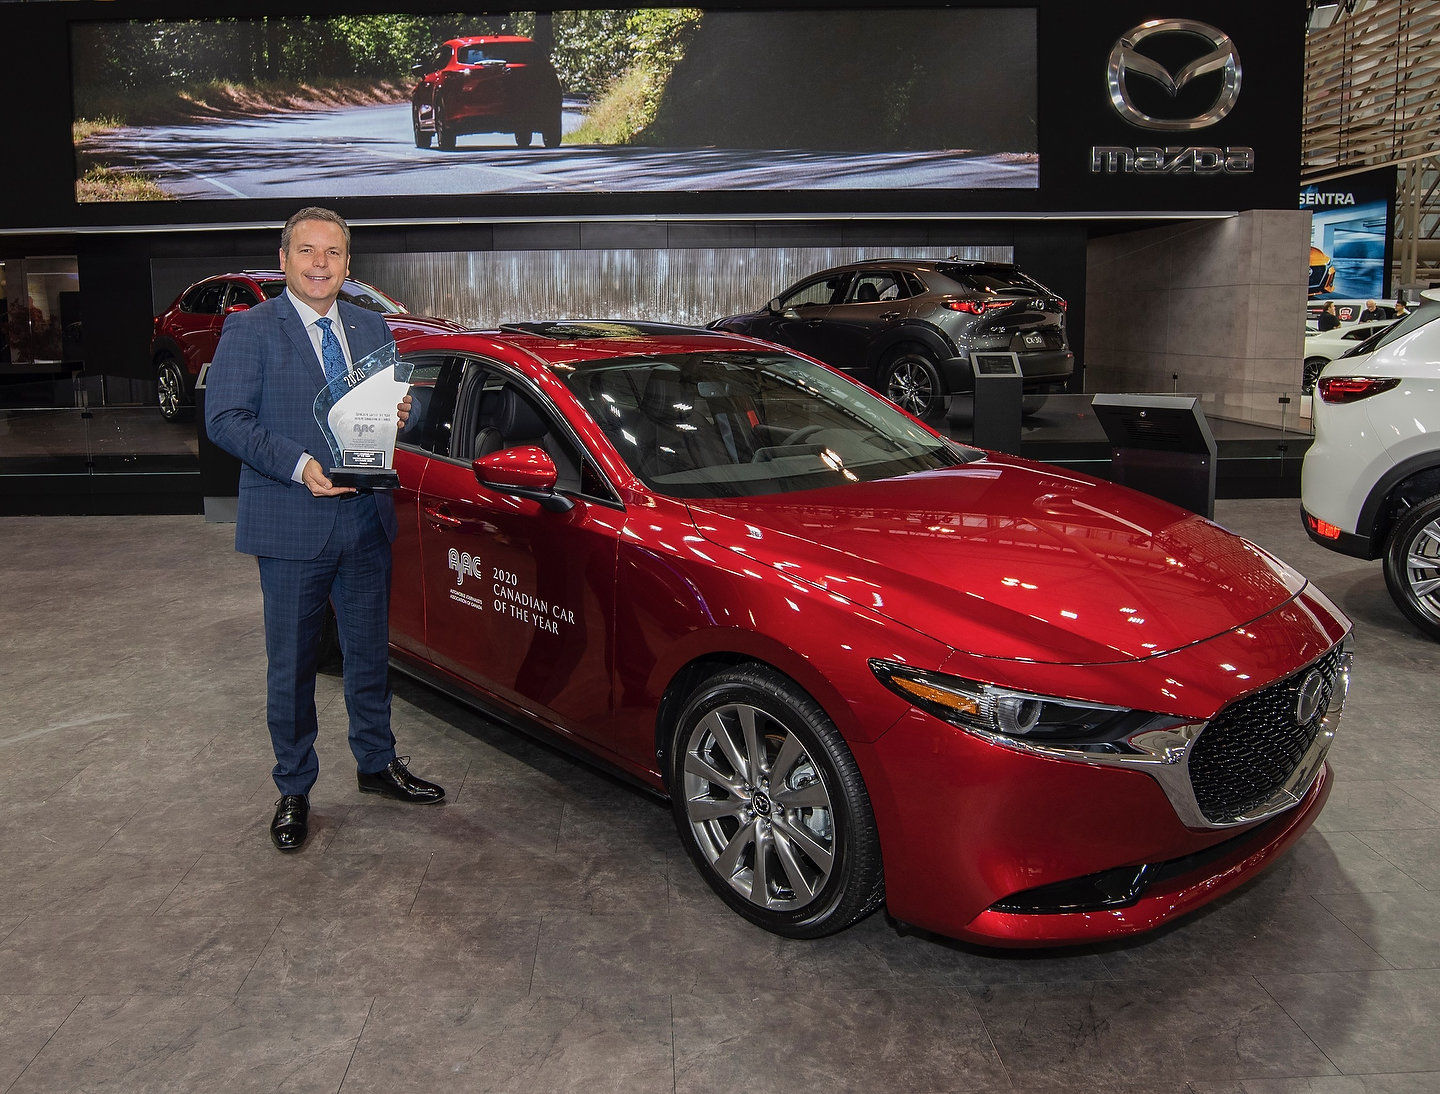 Mazda3 wins the title of Canadian Car of the Year